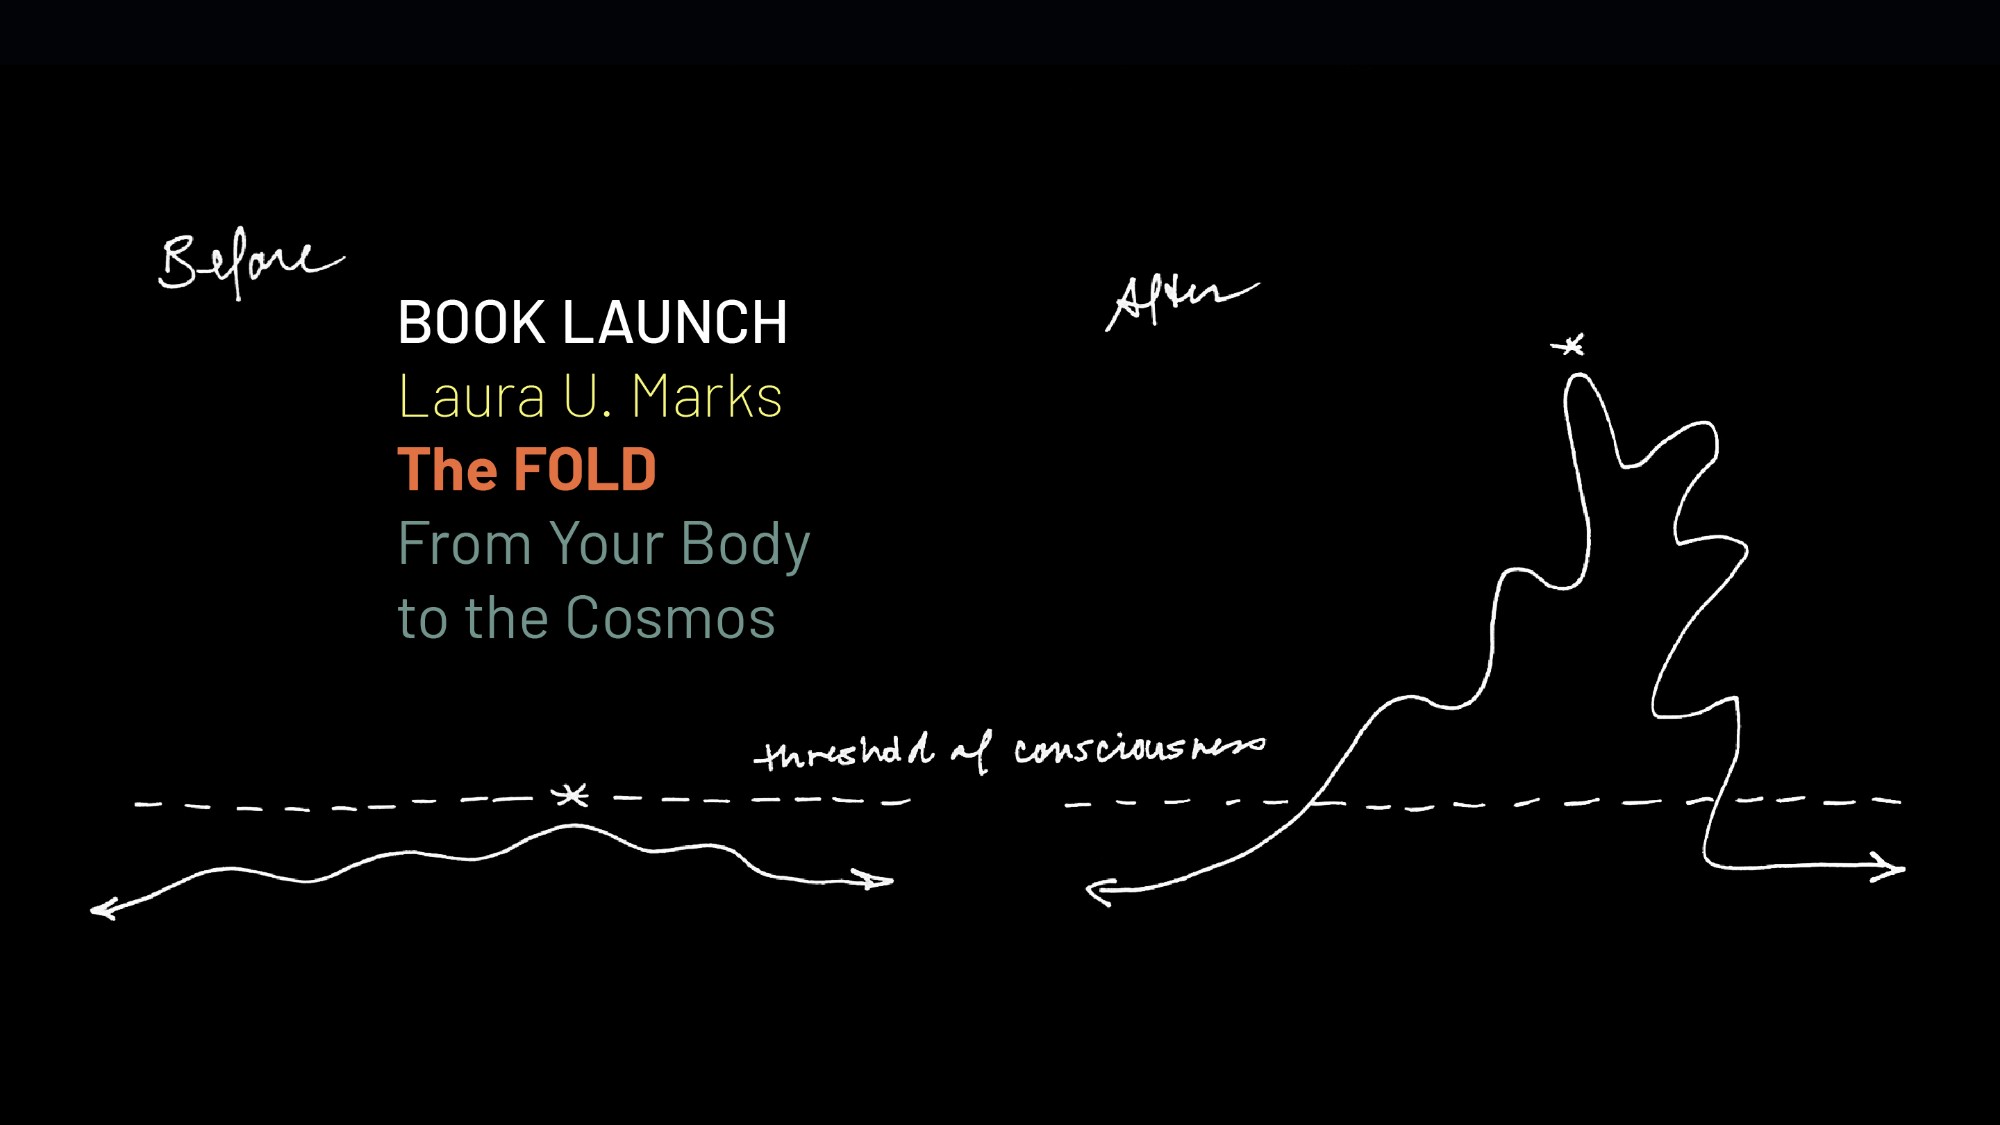 Book Launch: Laura U. Marks' The Fold